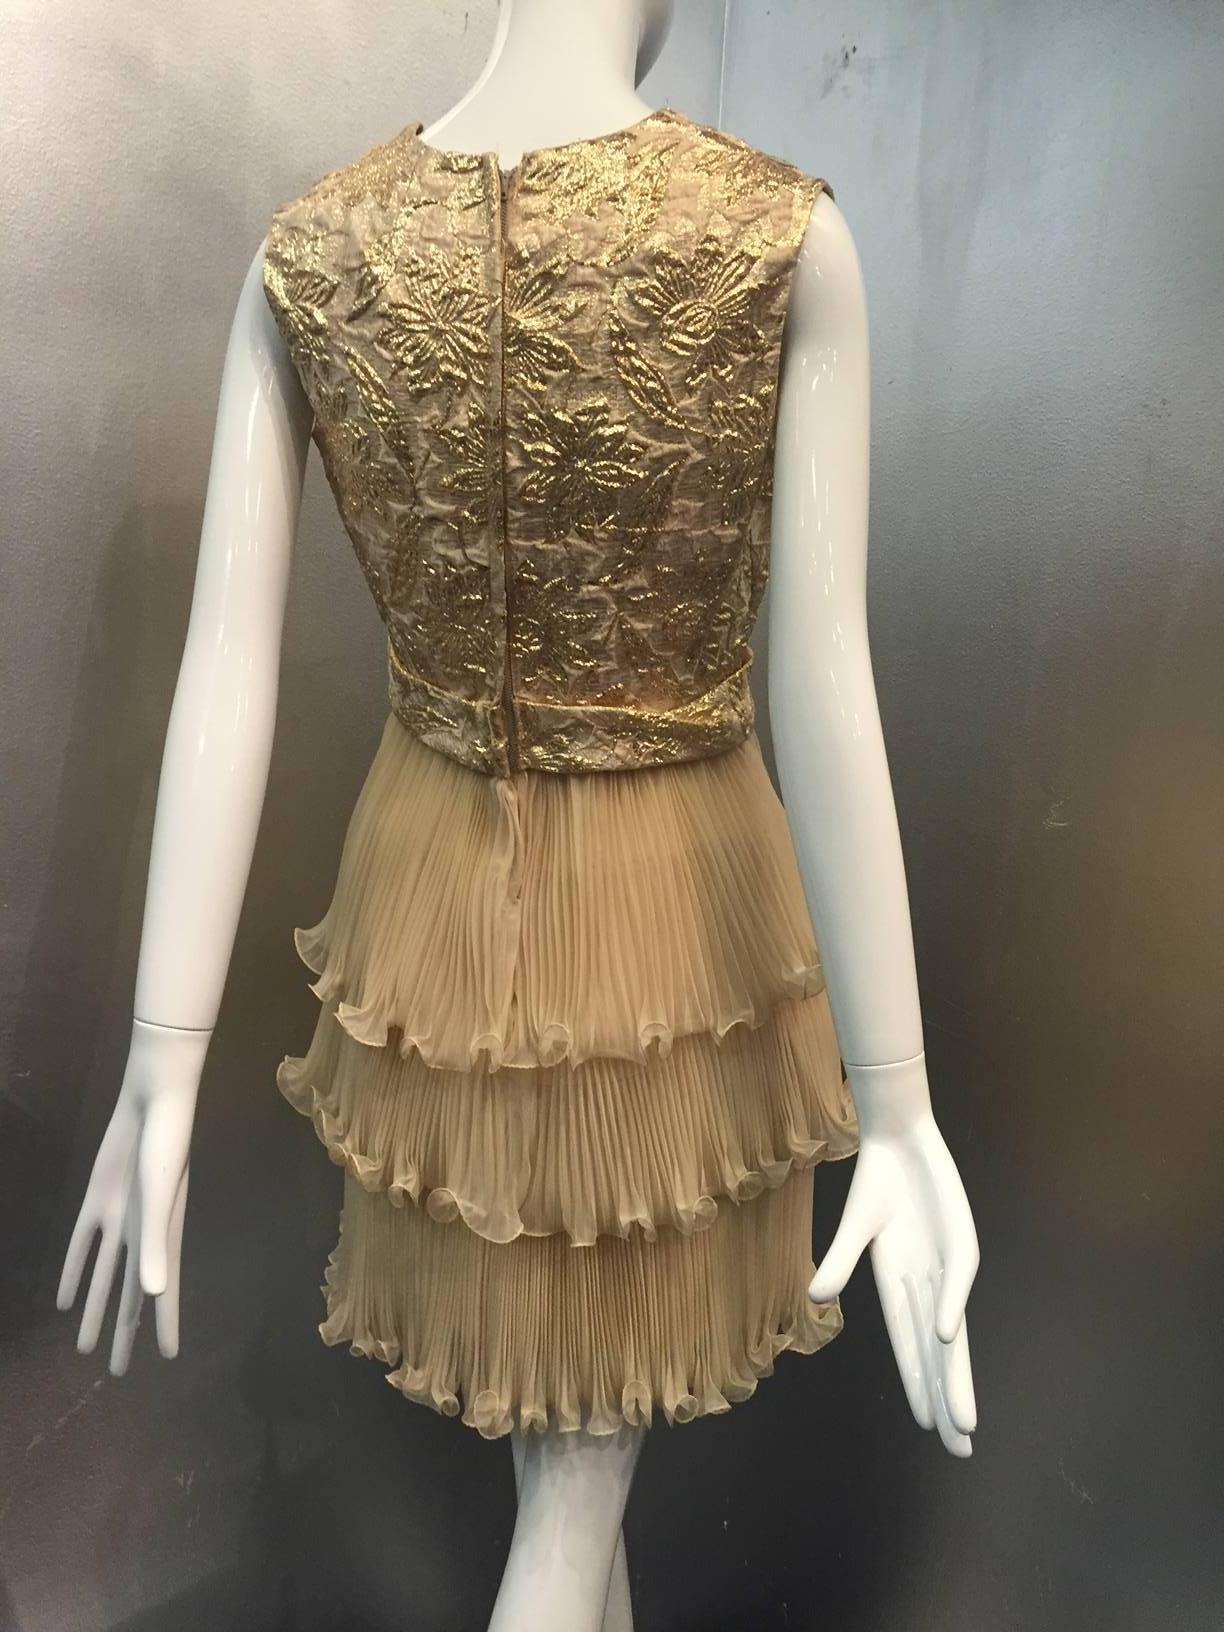 A beautiful 1960s lame and pleated organza cocktail dress:  bodice and belt are gold lame brocade with a center bow on the belt.  Skirt is three-tiered micro-pleated organza with ruffled edging. Completely lined. 